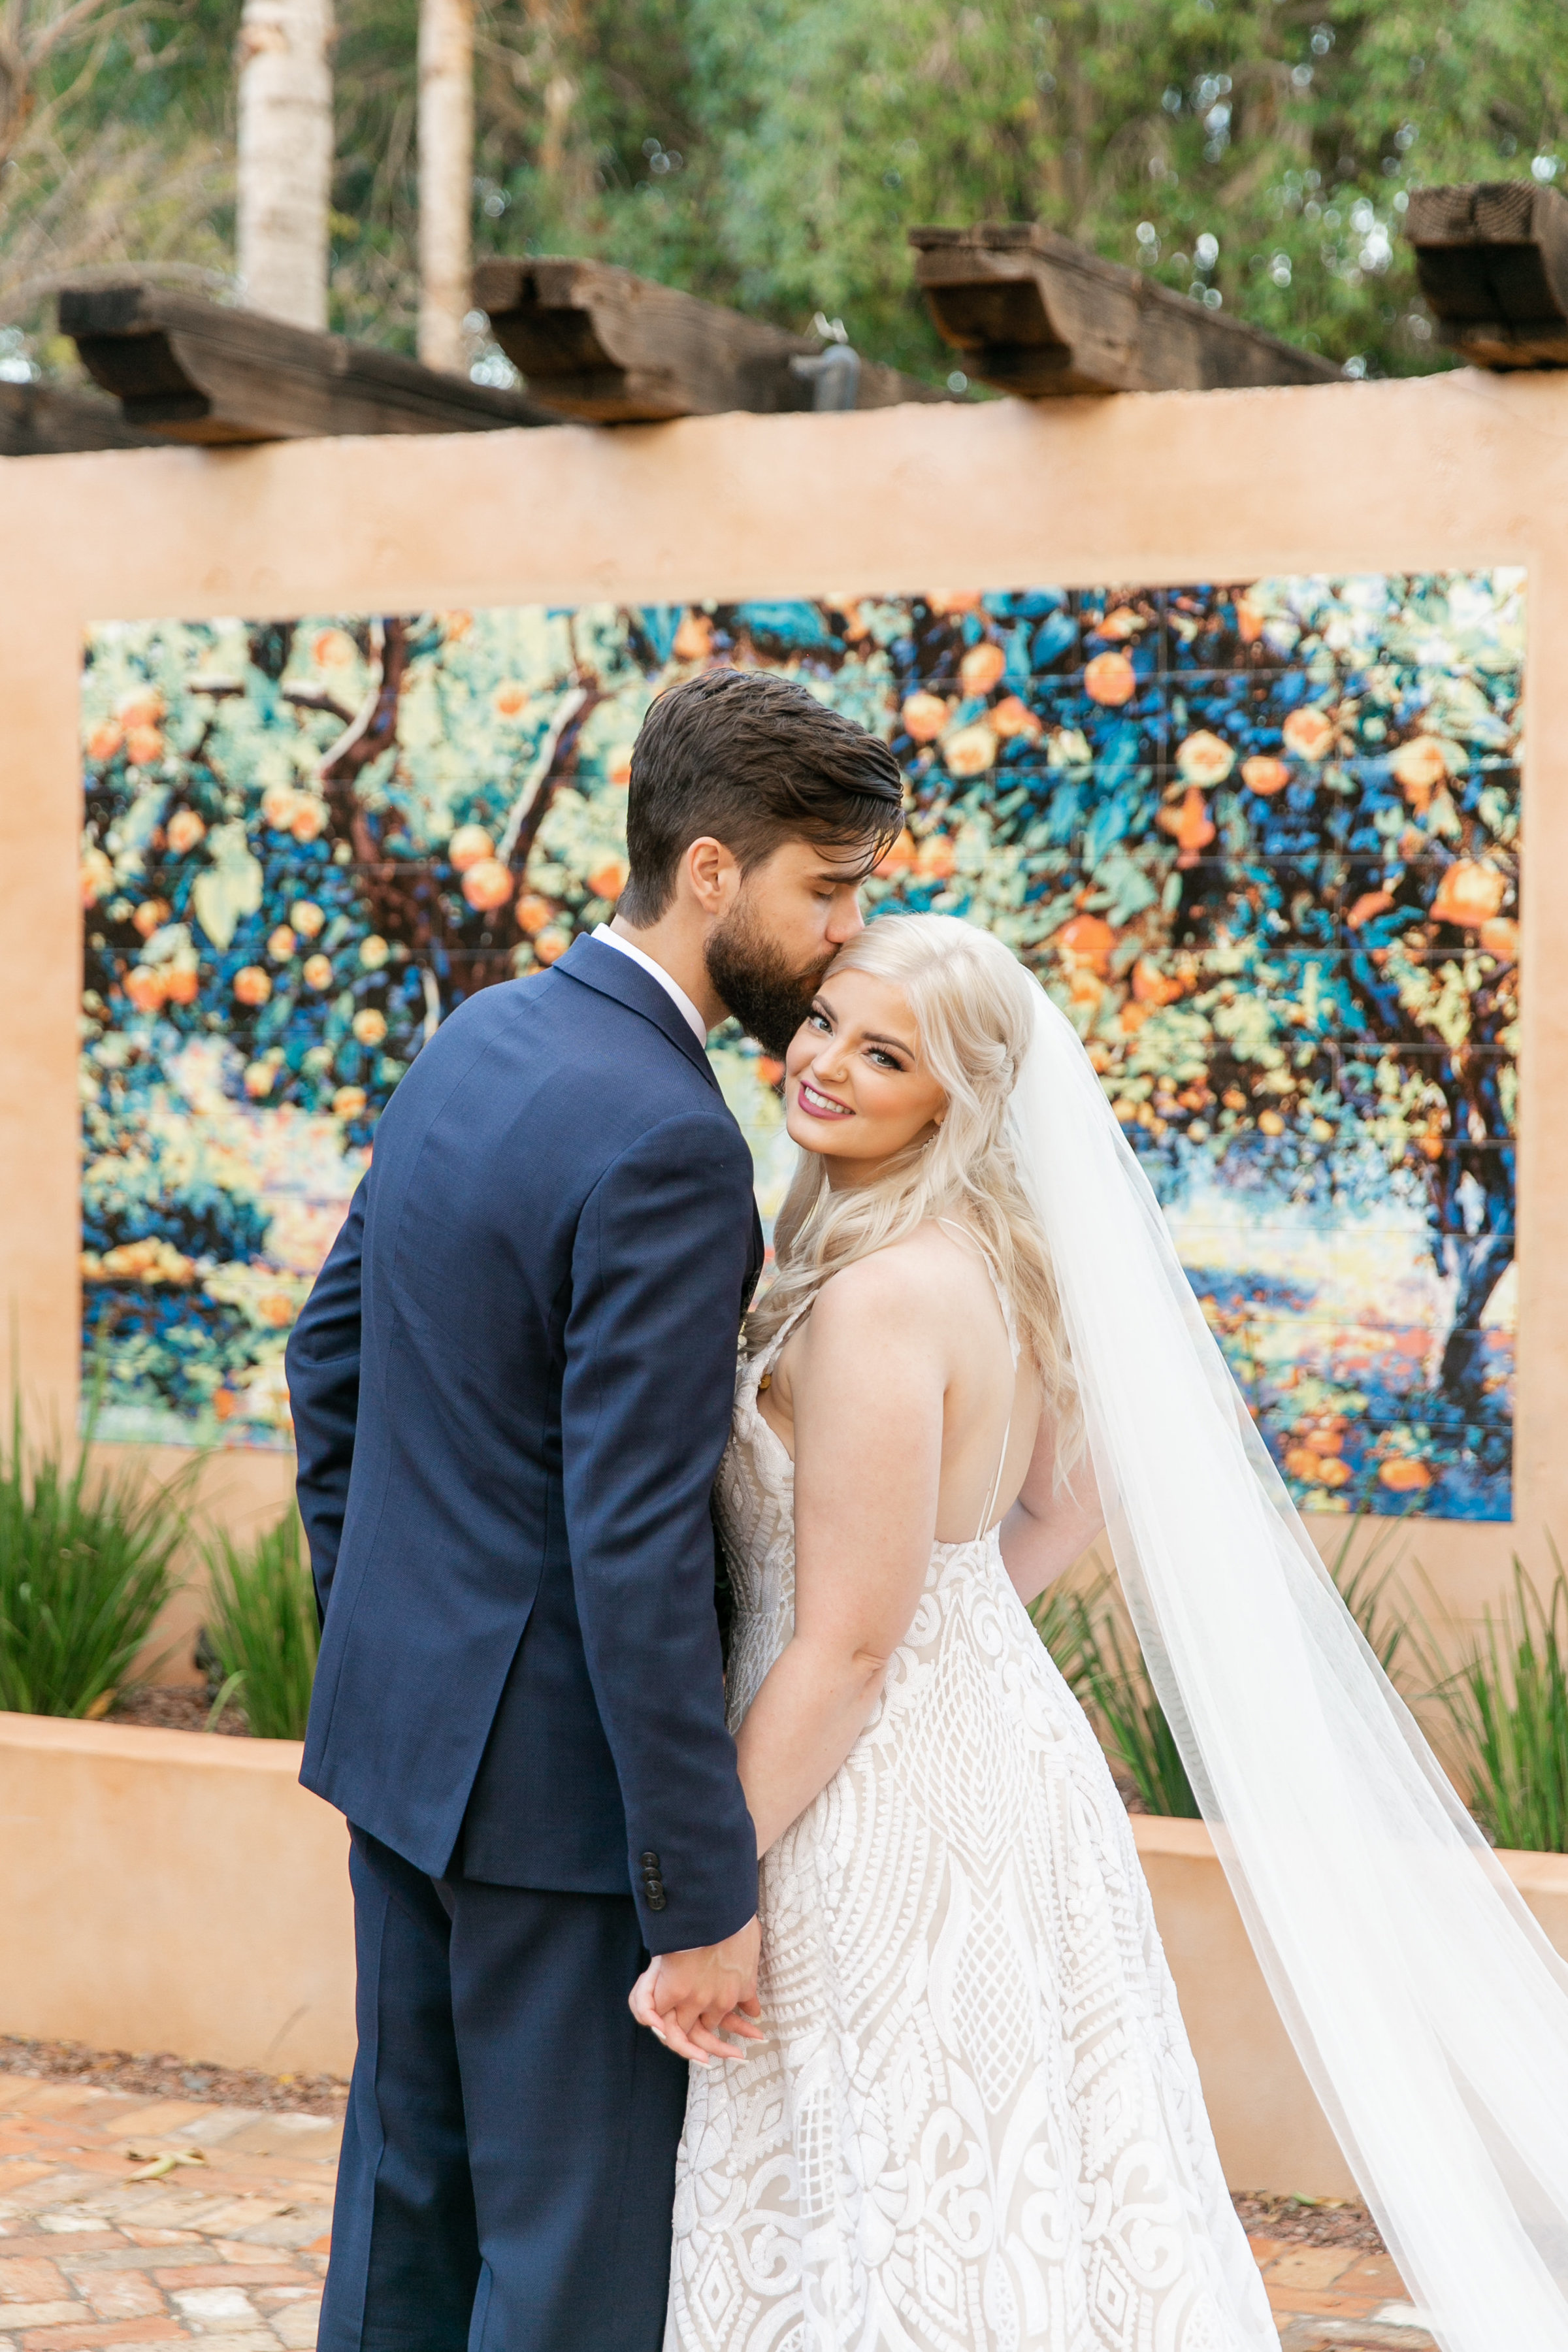 Karlie Colleen Photography - The Royal Palms Wedding - Some Like It Classic - Alex & Sam-524